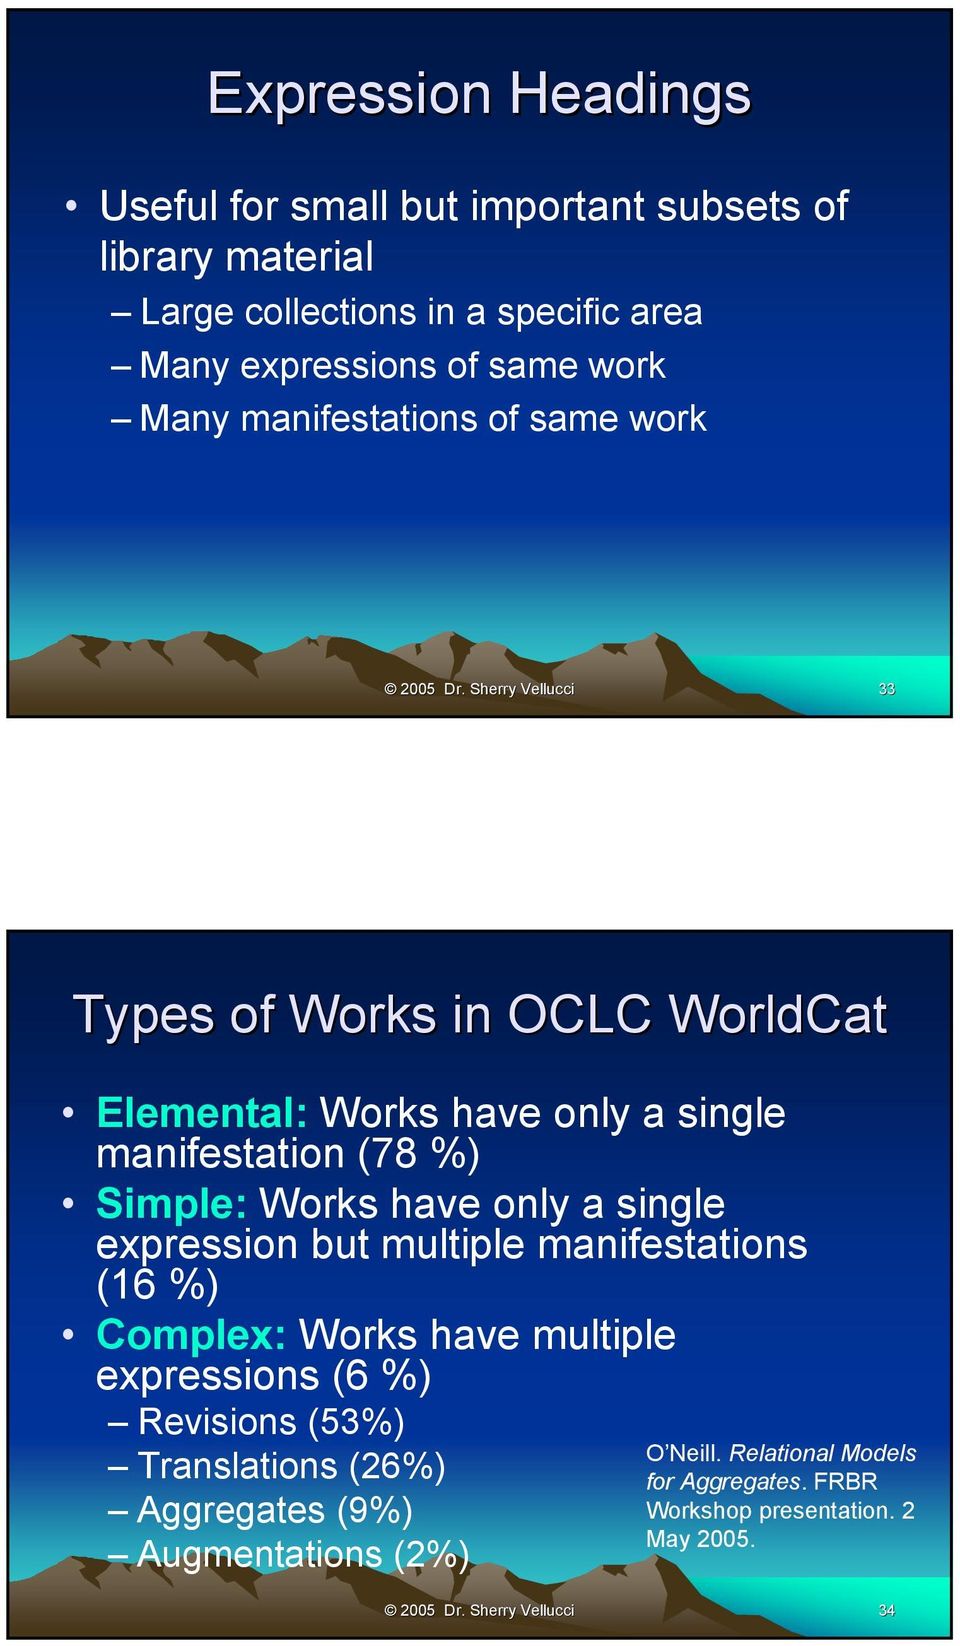 Sherry Vellucci 33 Types of Works in OCLC WorldCat Elemental: Works have only a single manifestation (78 %) Simple: Works have only a single